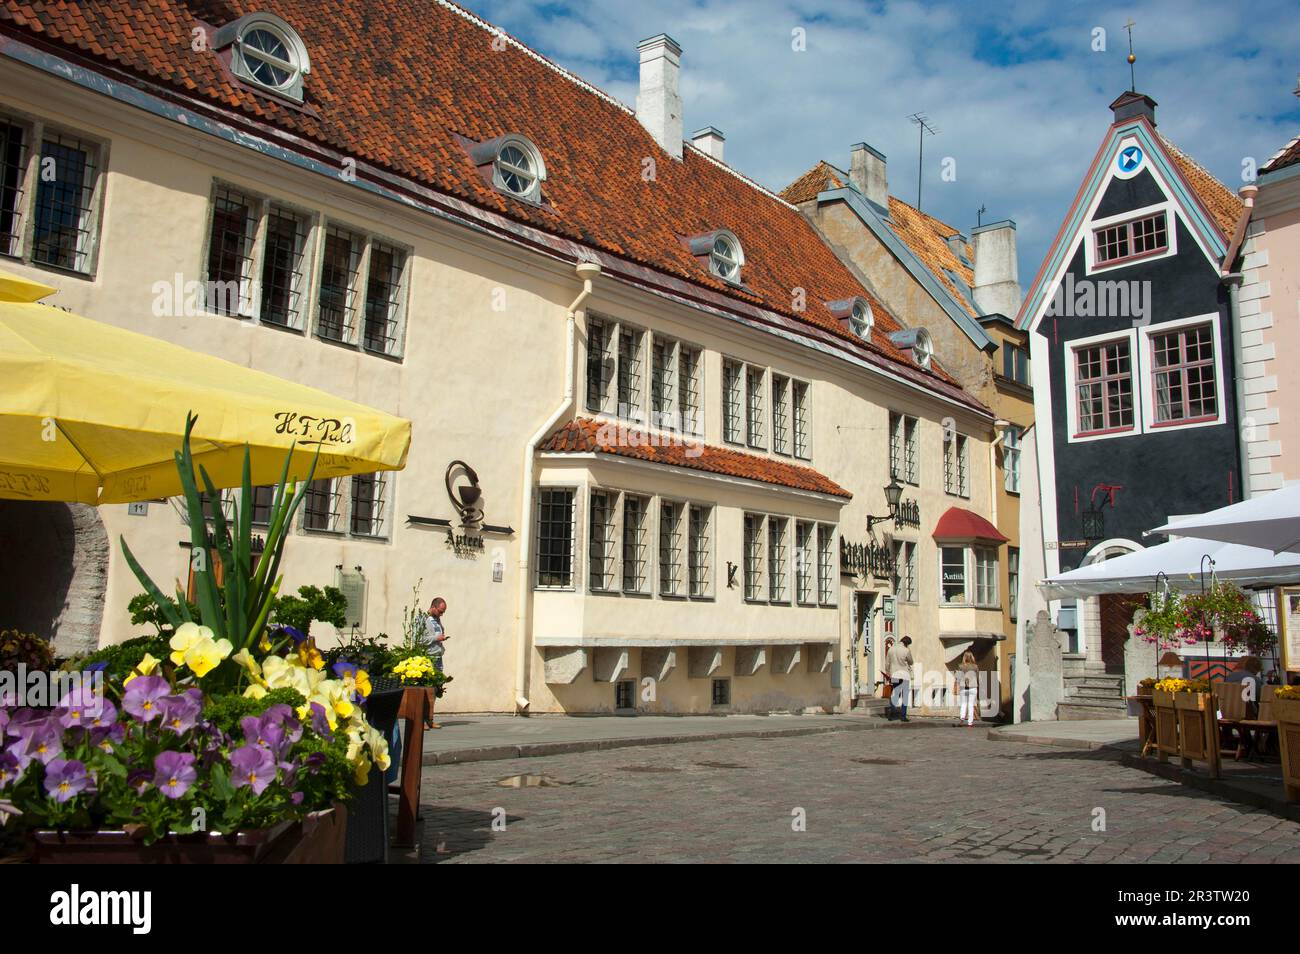 Pharmacy, Old Town, Tallinn, Estonia, Baltic States, Europe, Council Pharmacy, Raeapteek, former craftsman's house on the right, Monuments Office Stock Photo